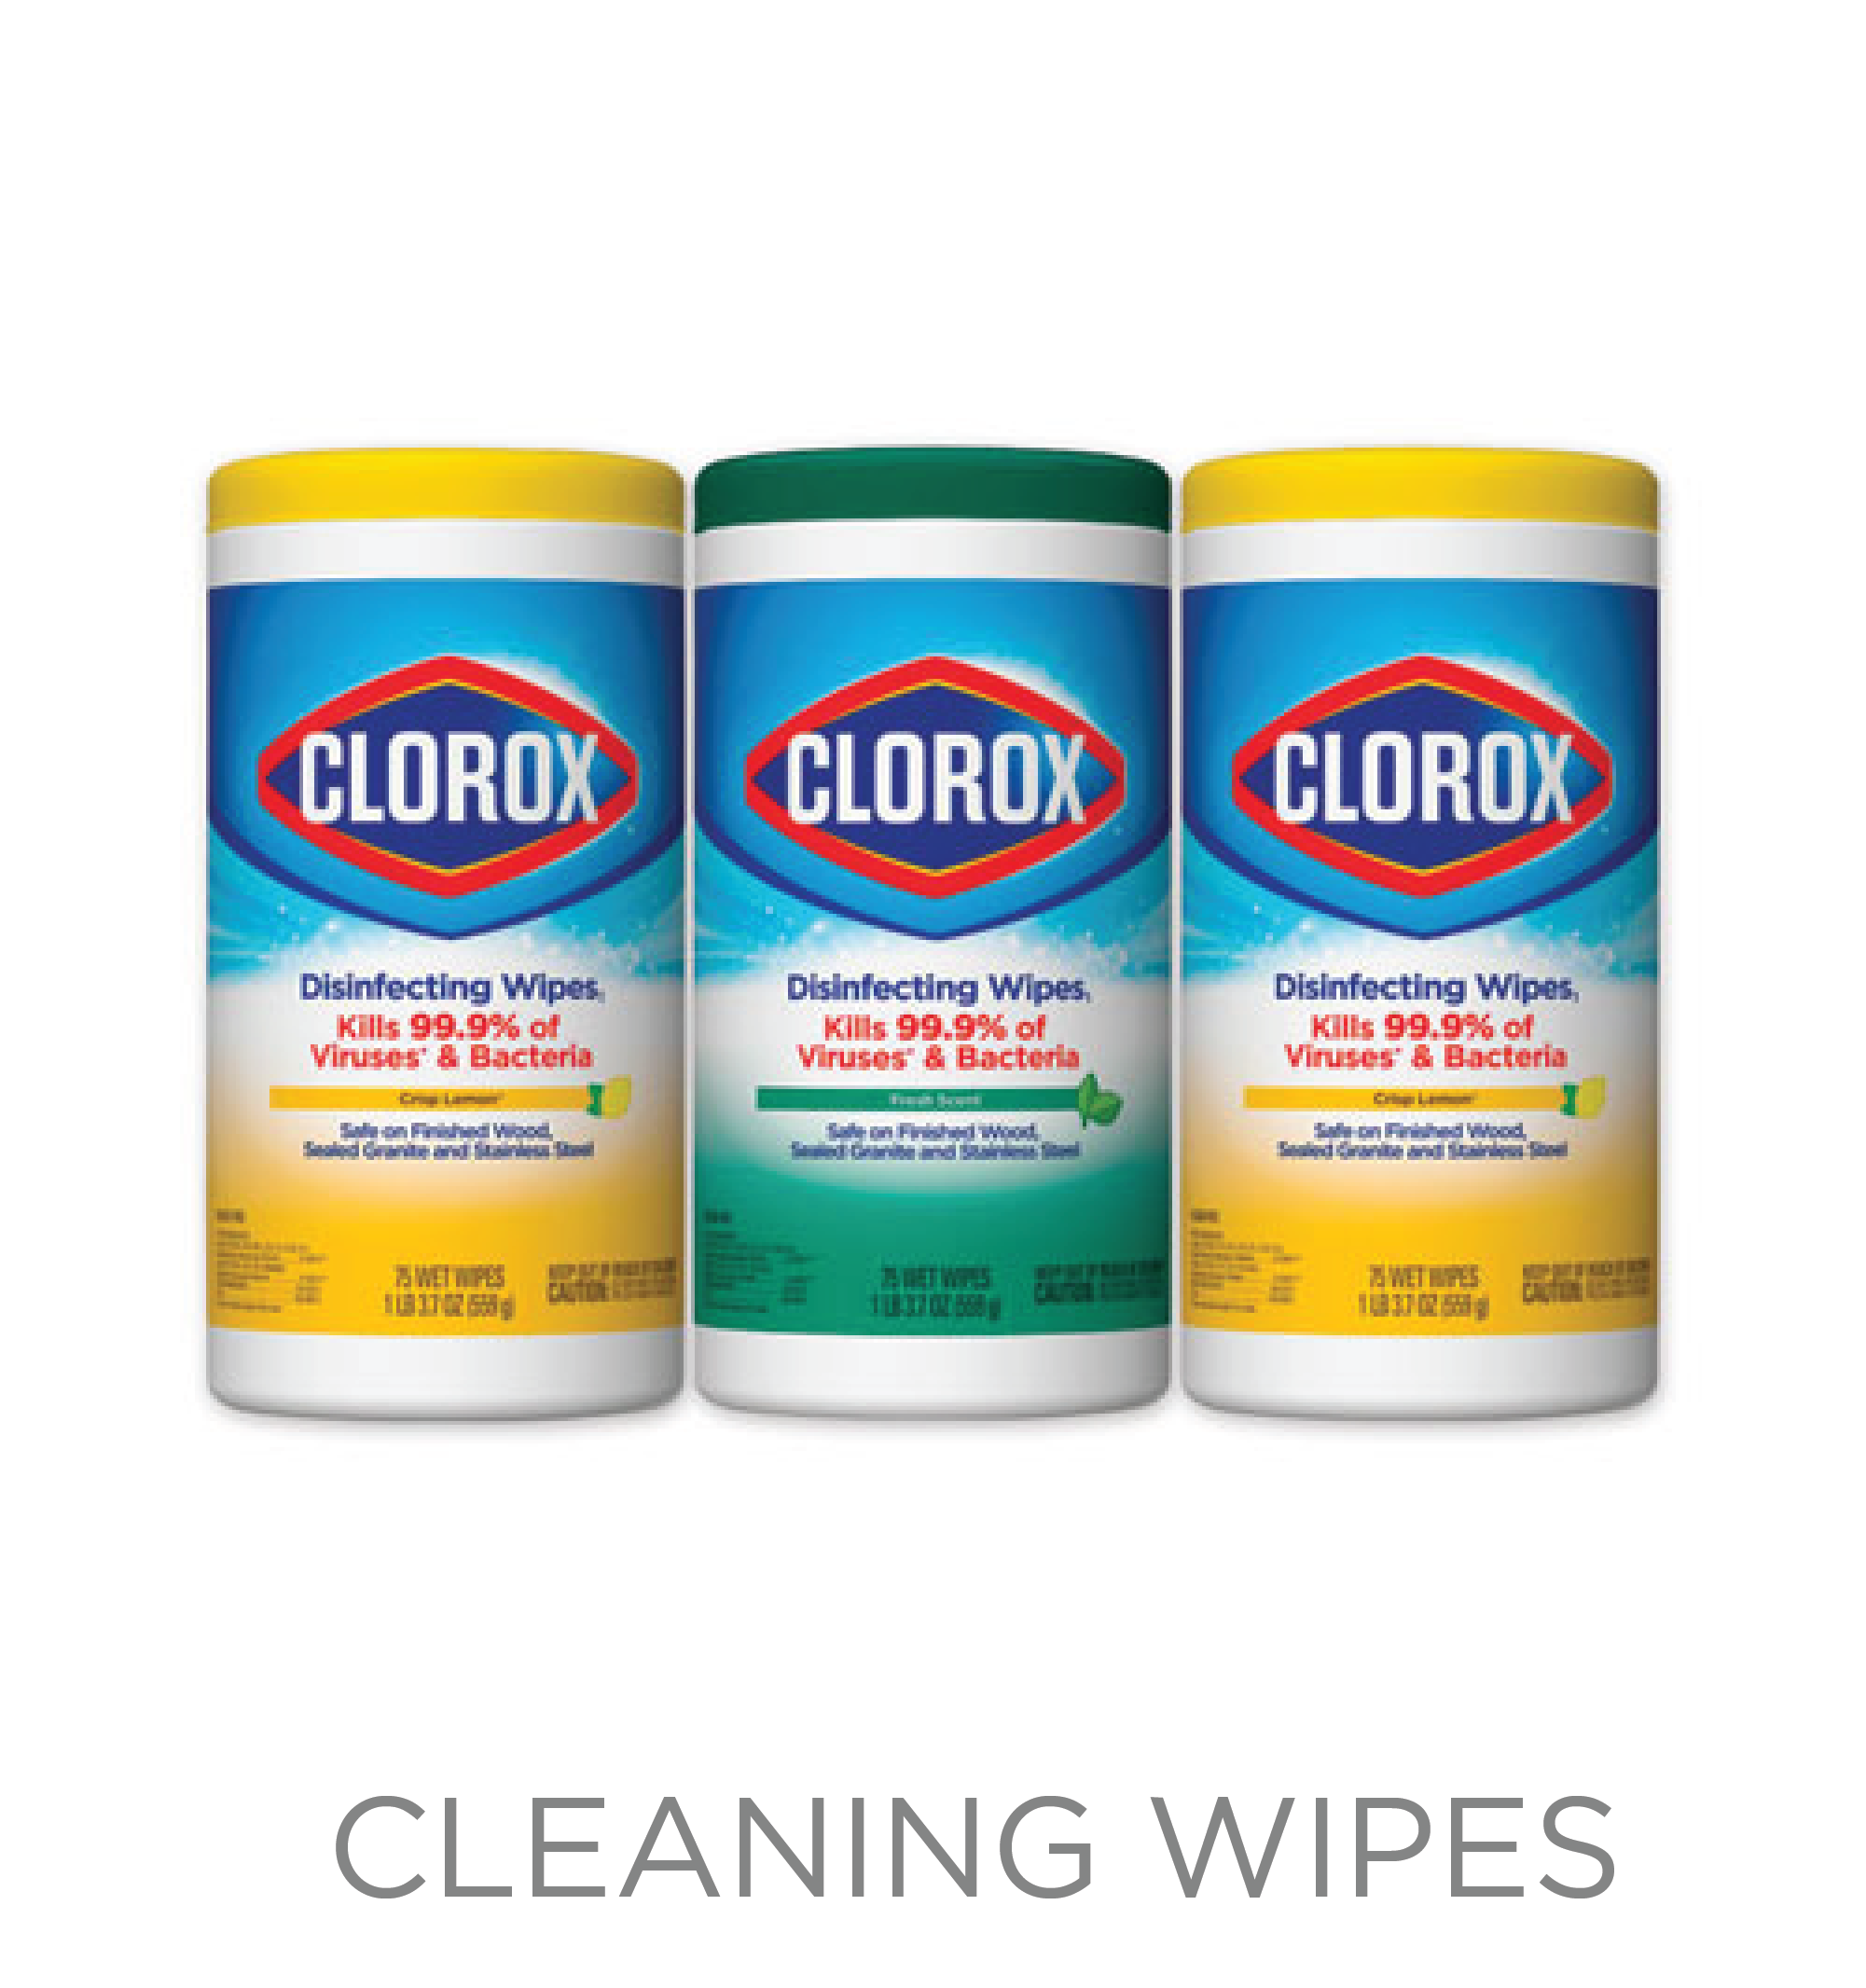 Cleaning Wipes - Holiday Season